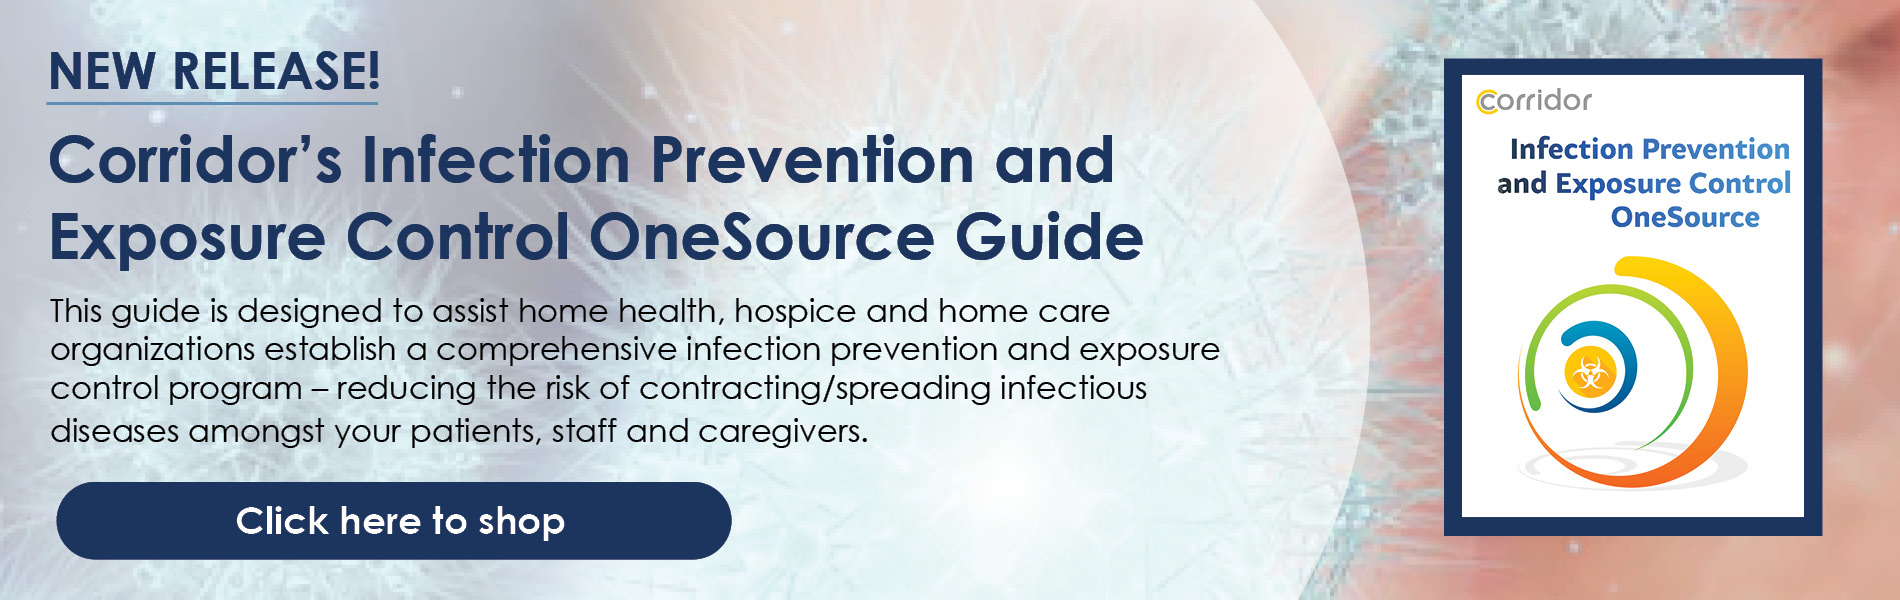 SHOP NOW for the Infection Control and Exposure Prevention OneSource